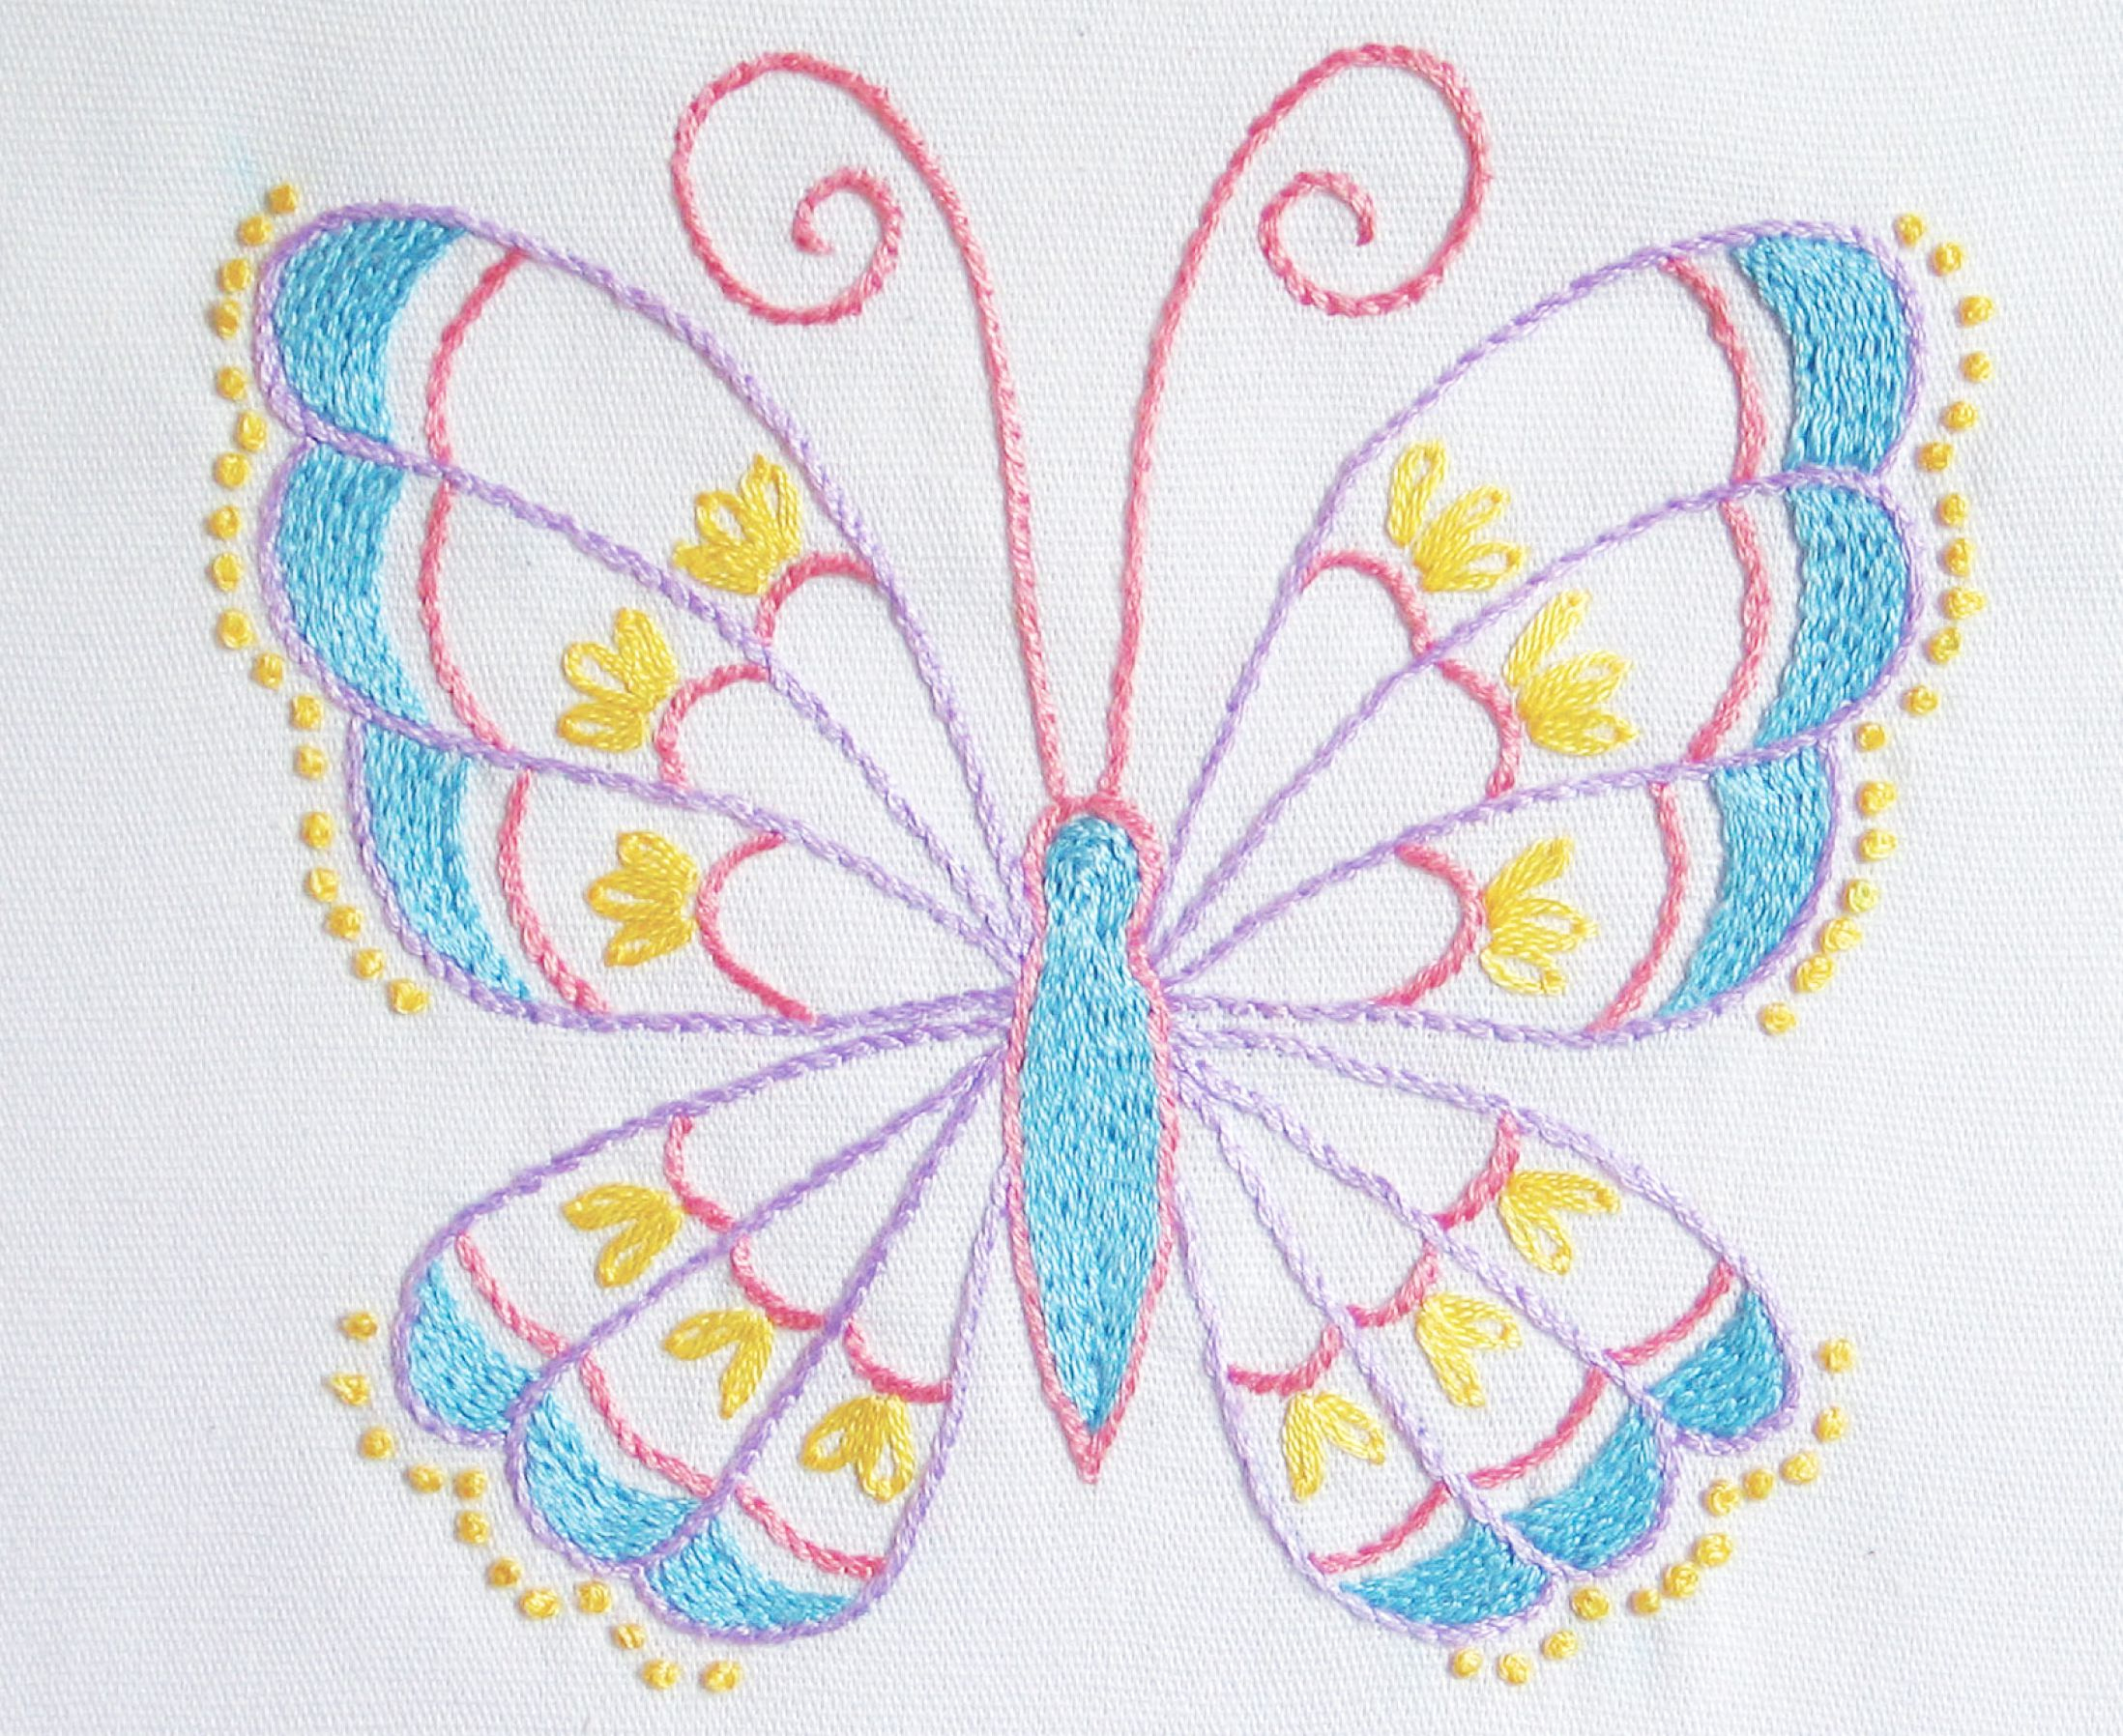 Mandala Embroidery Patterns Our Top 25 Free Embroidery Designs